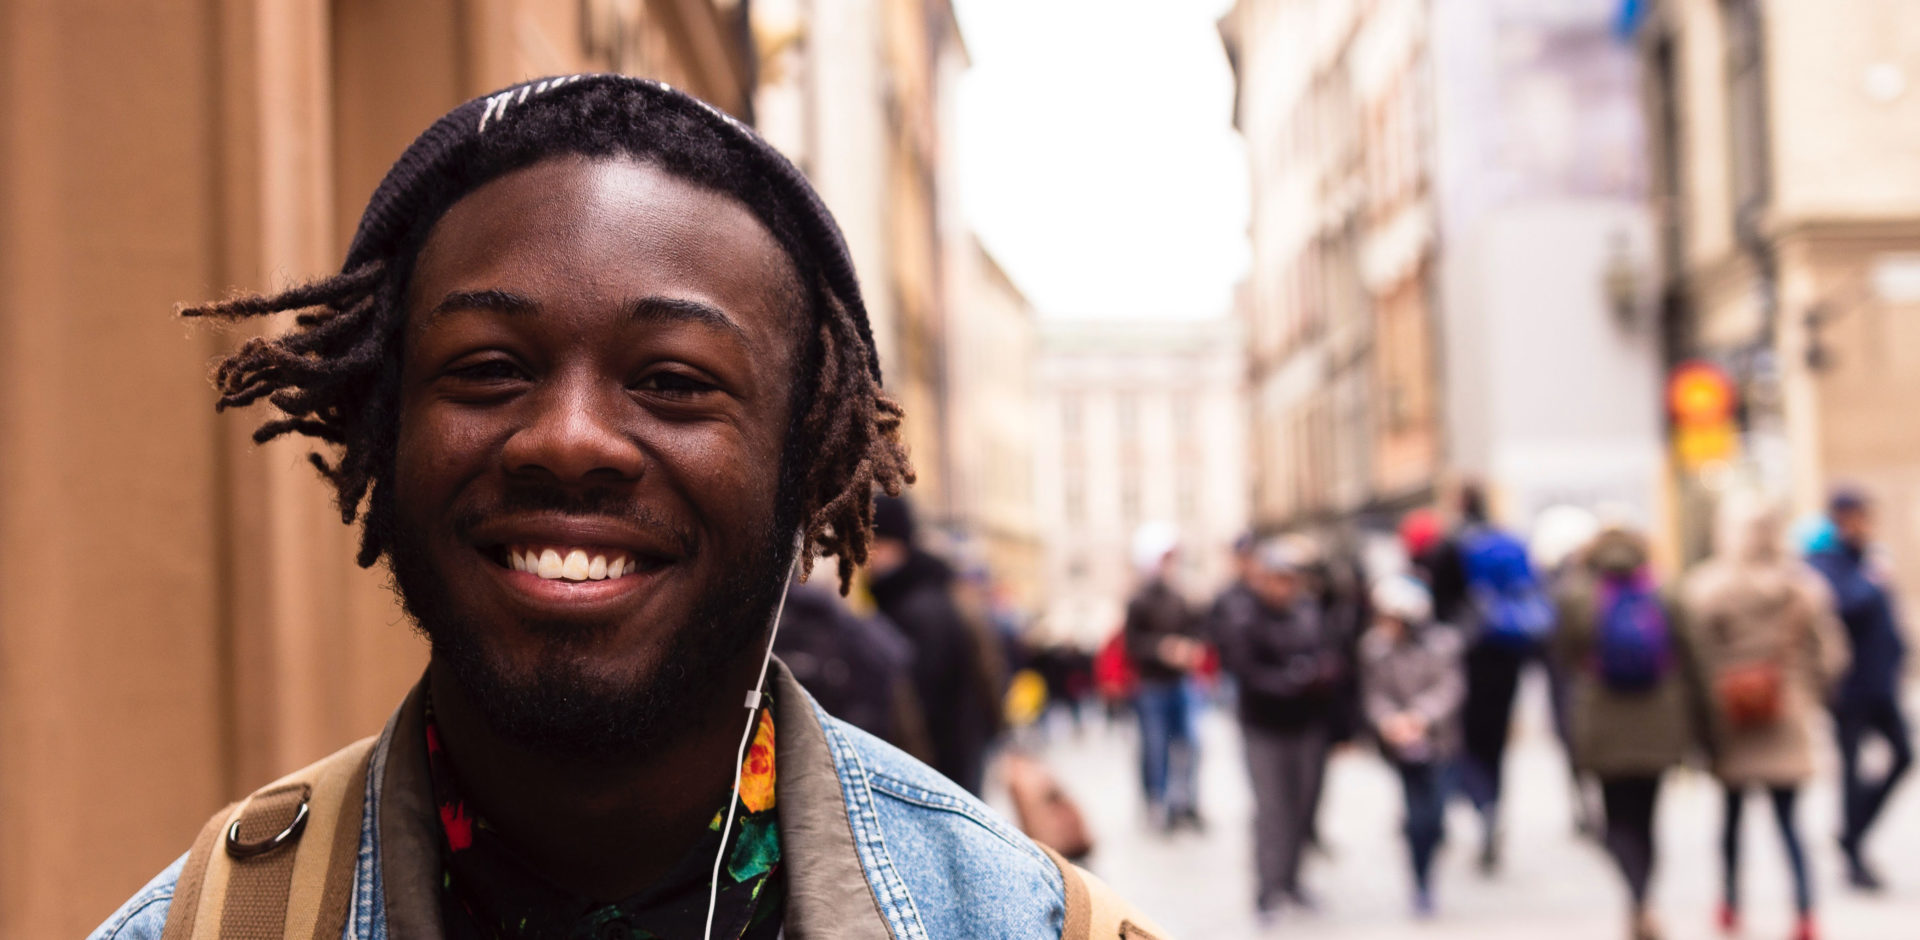 Man with earbuds smiling in the city